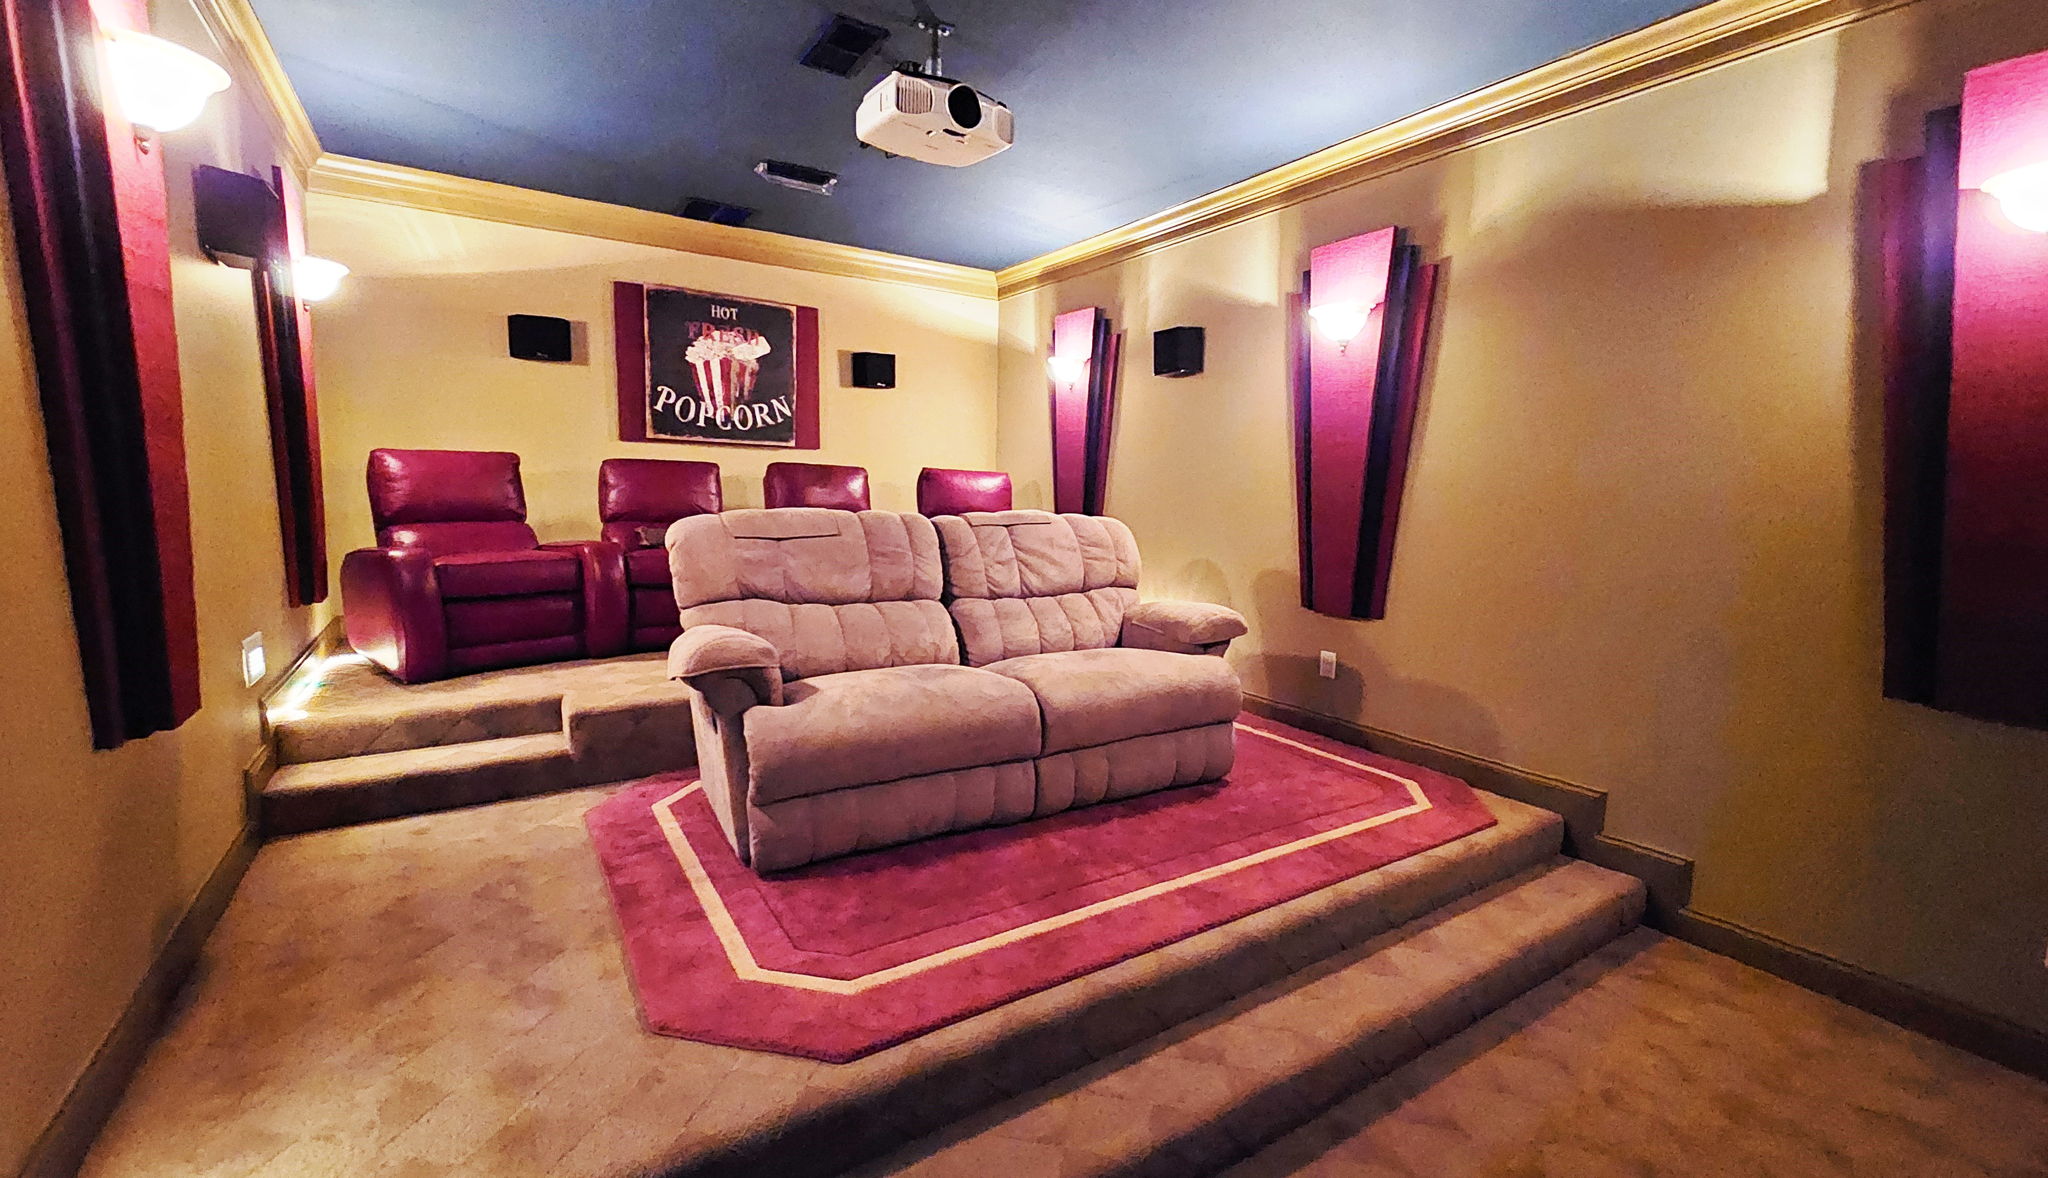 Home Theater - Everything Remains!